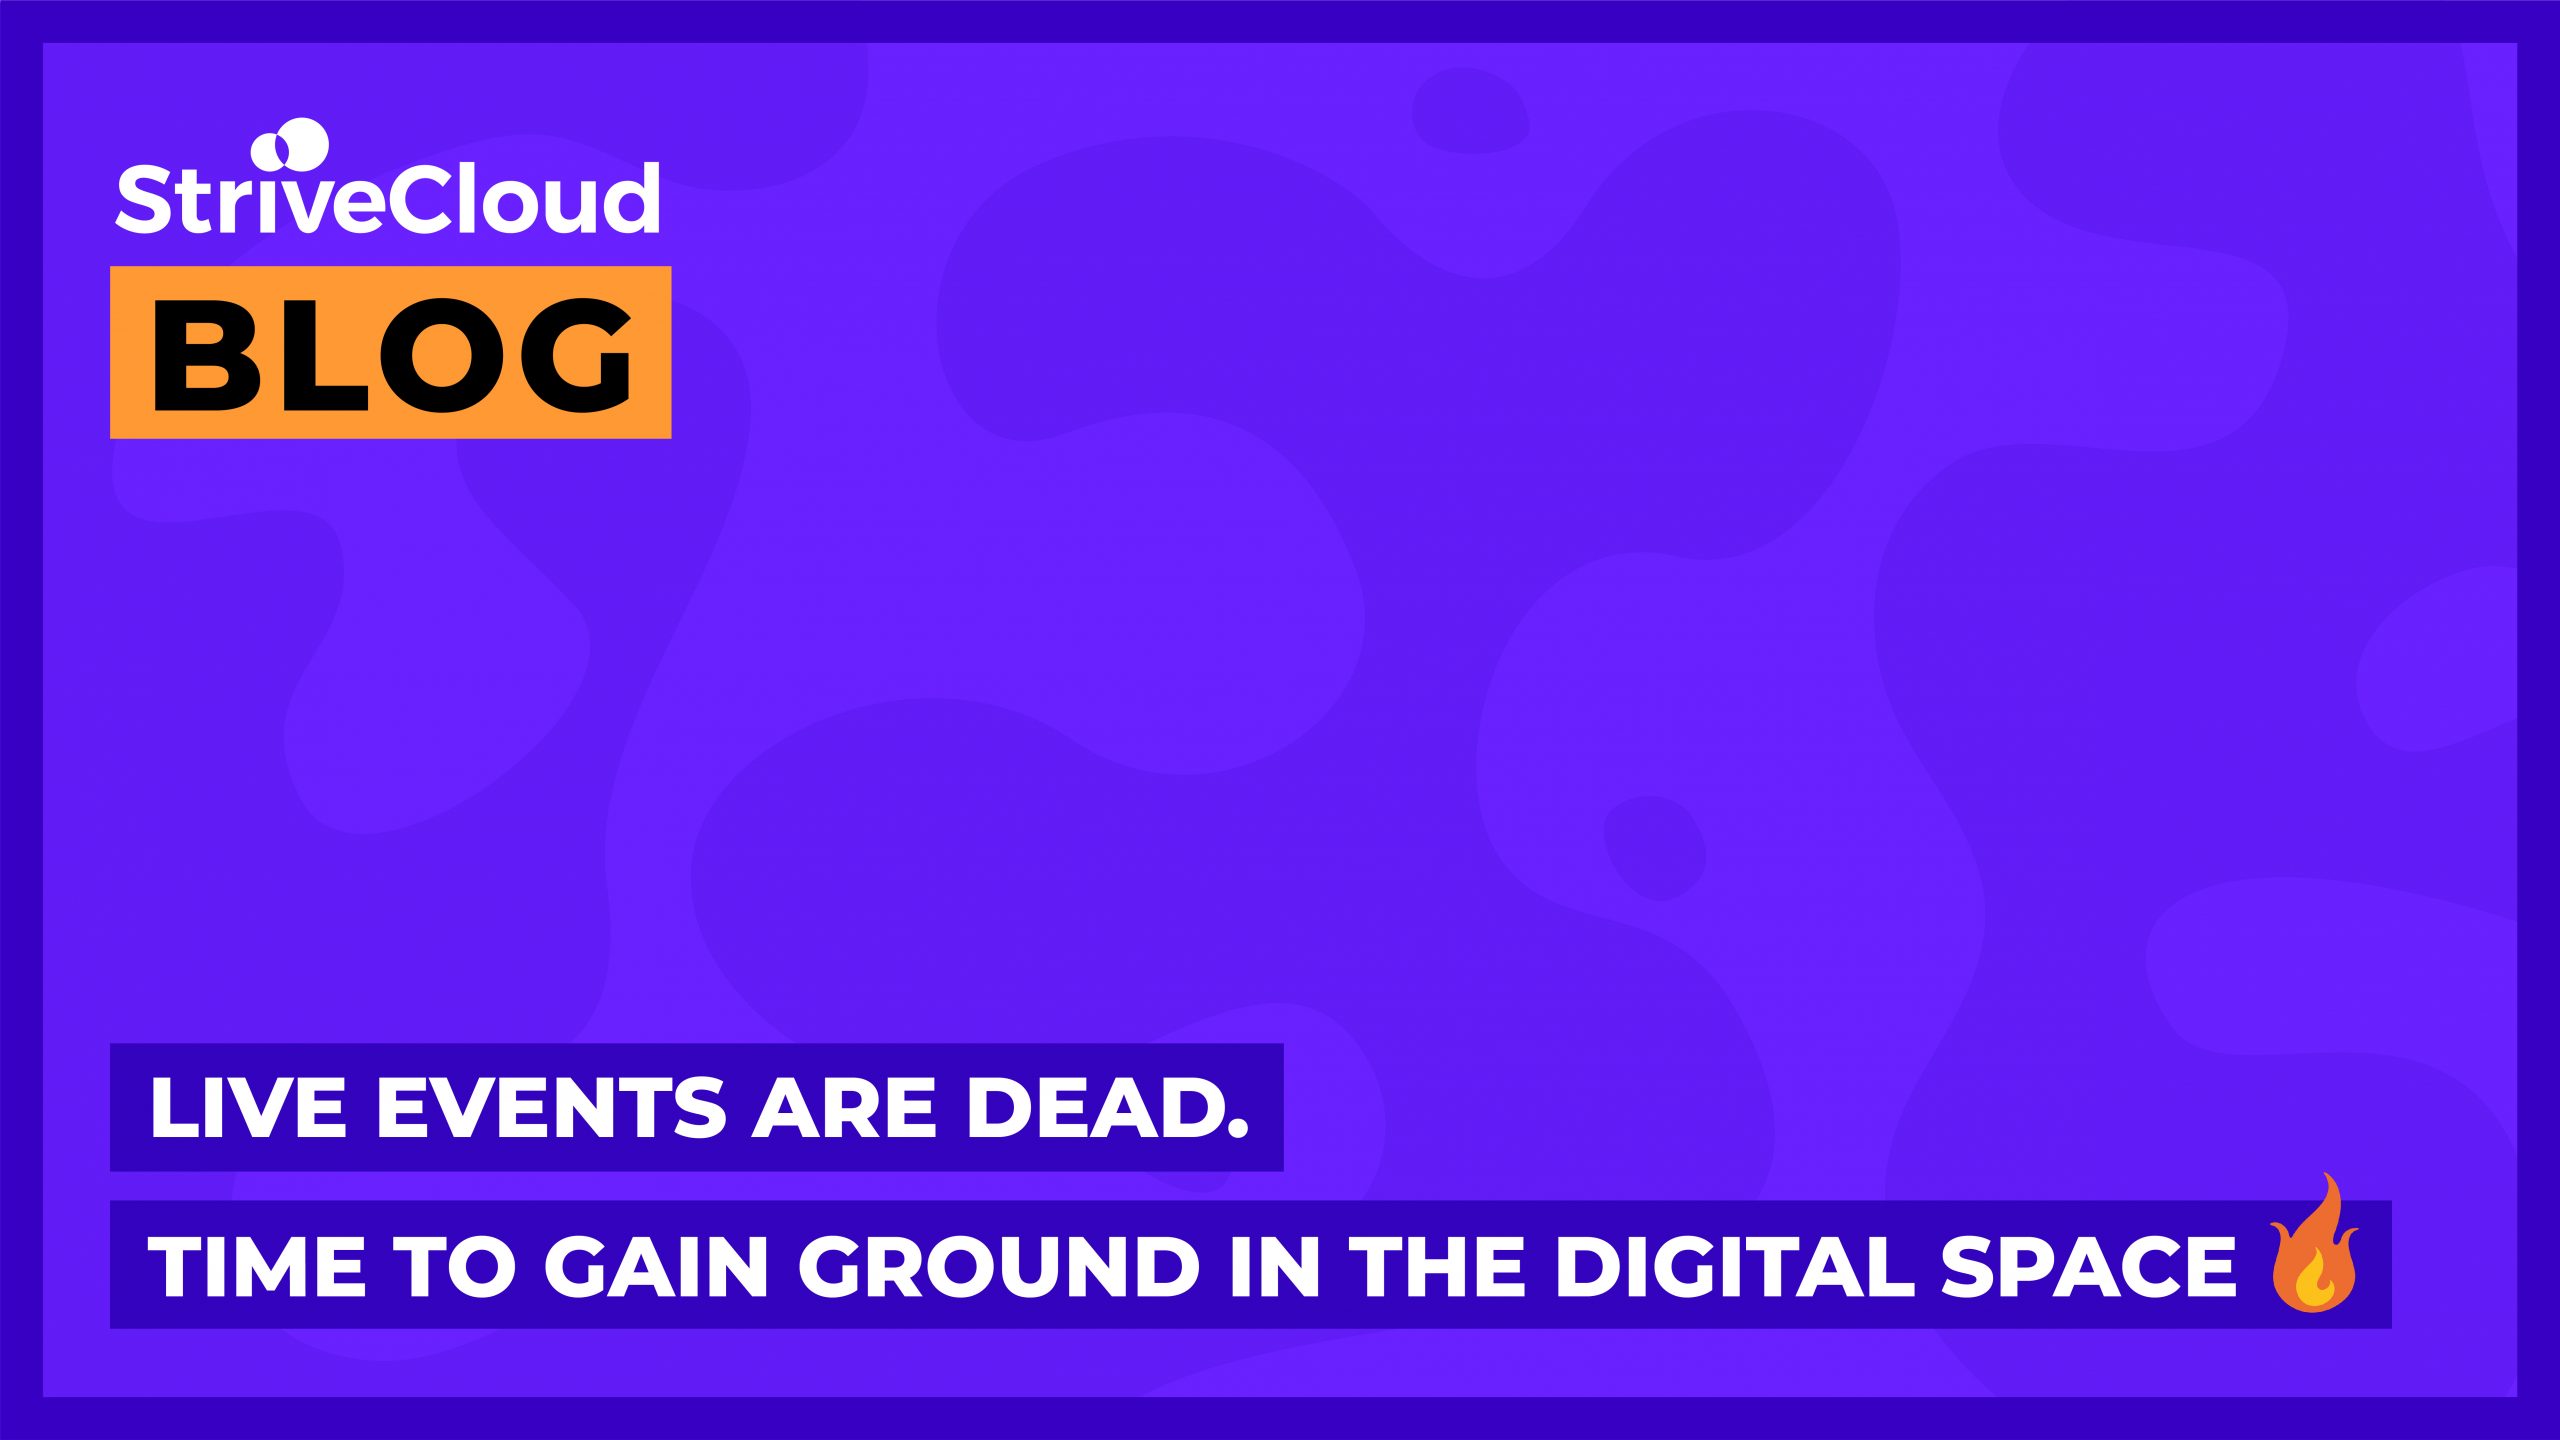 Blog StriveCloud: live events are dead, time to gain ground in the digital space